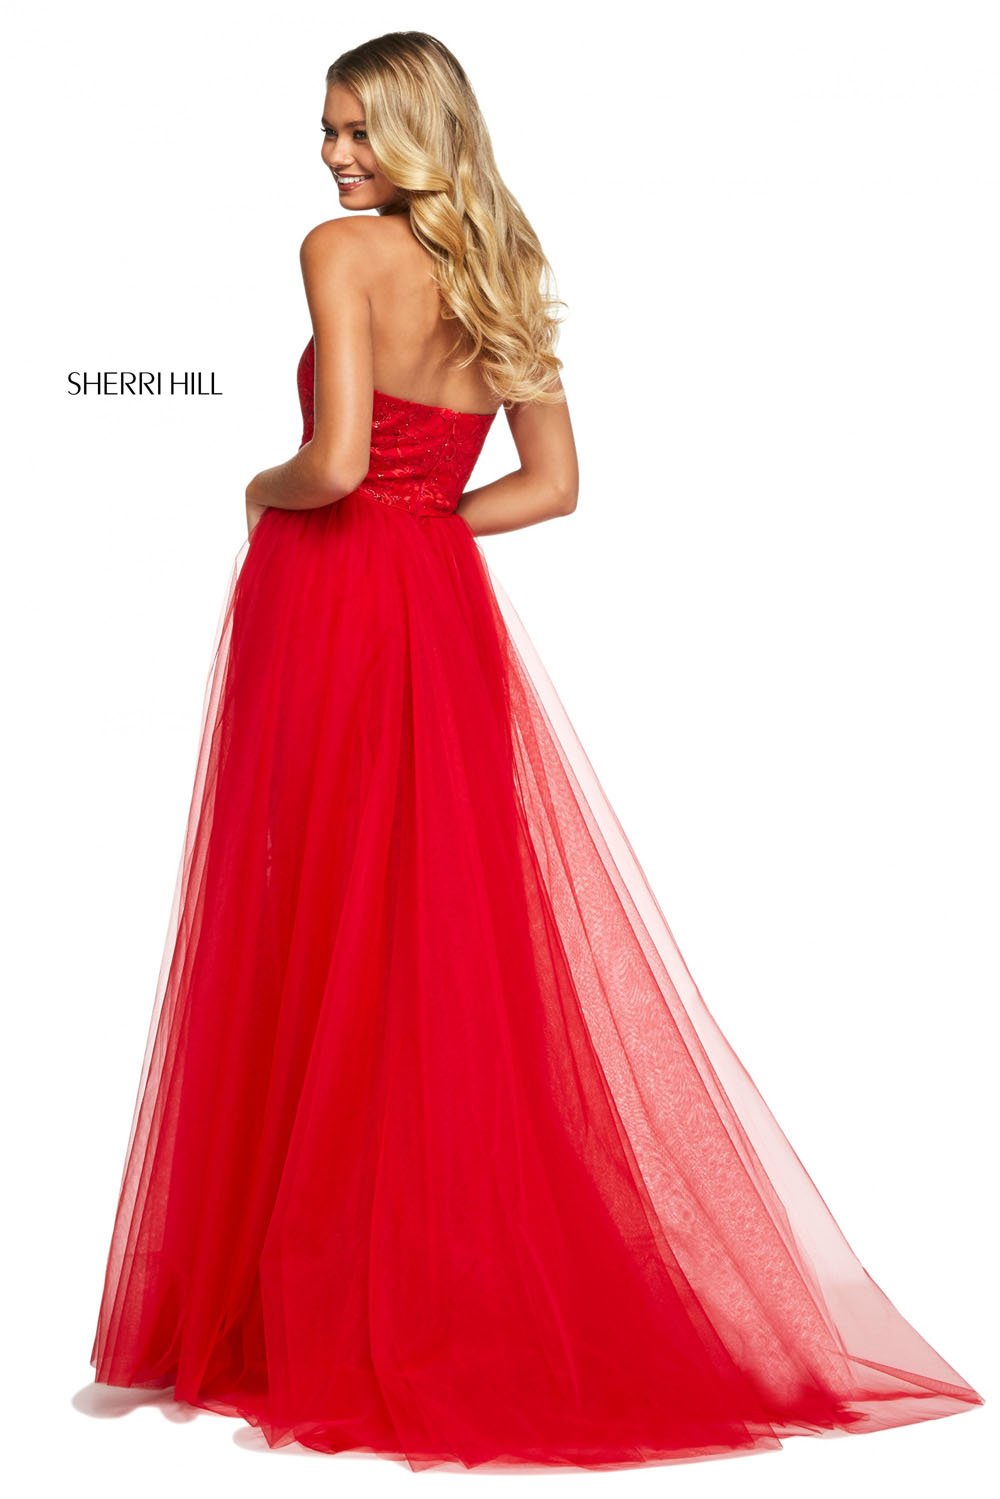 Sherri Hill 53207 dresses are available in the following colors: Black, Blush, Aqua, Ivory, Red. $450 is the  best price guarantee